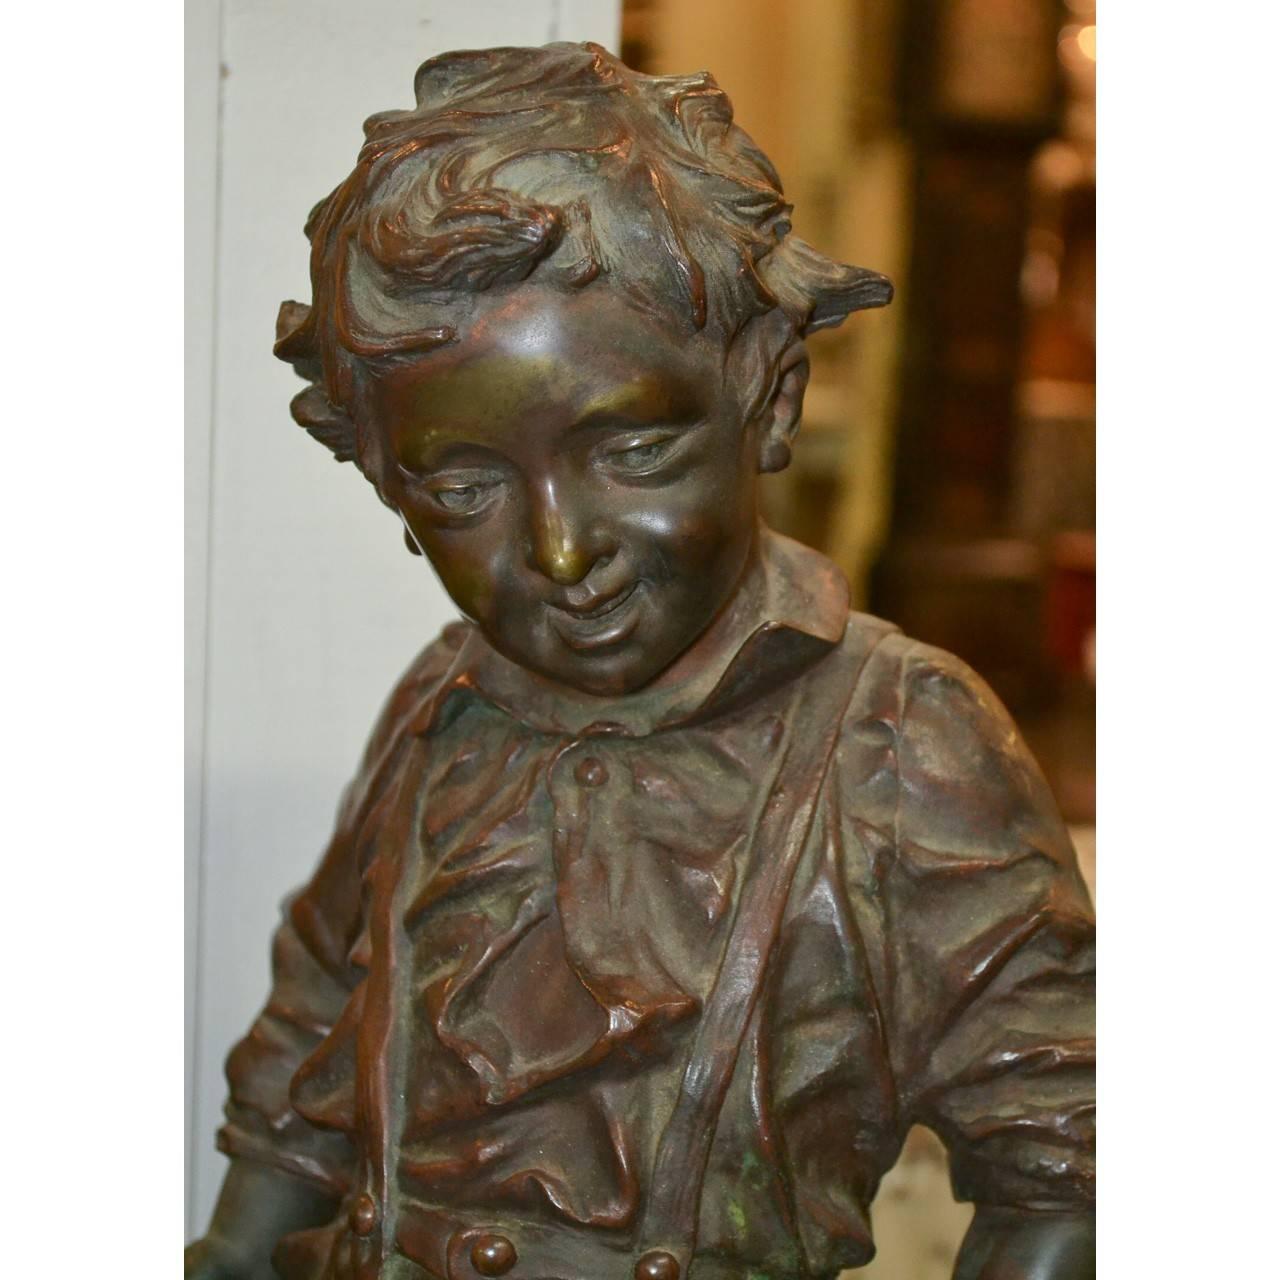 Bronze statue of a boy by French sculptor Charles Anfrie.
Charles was born in 1833 and died in 1905,
circa 1870
Measures: 24